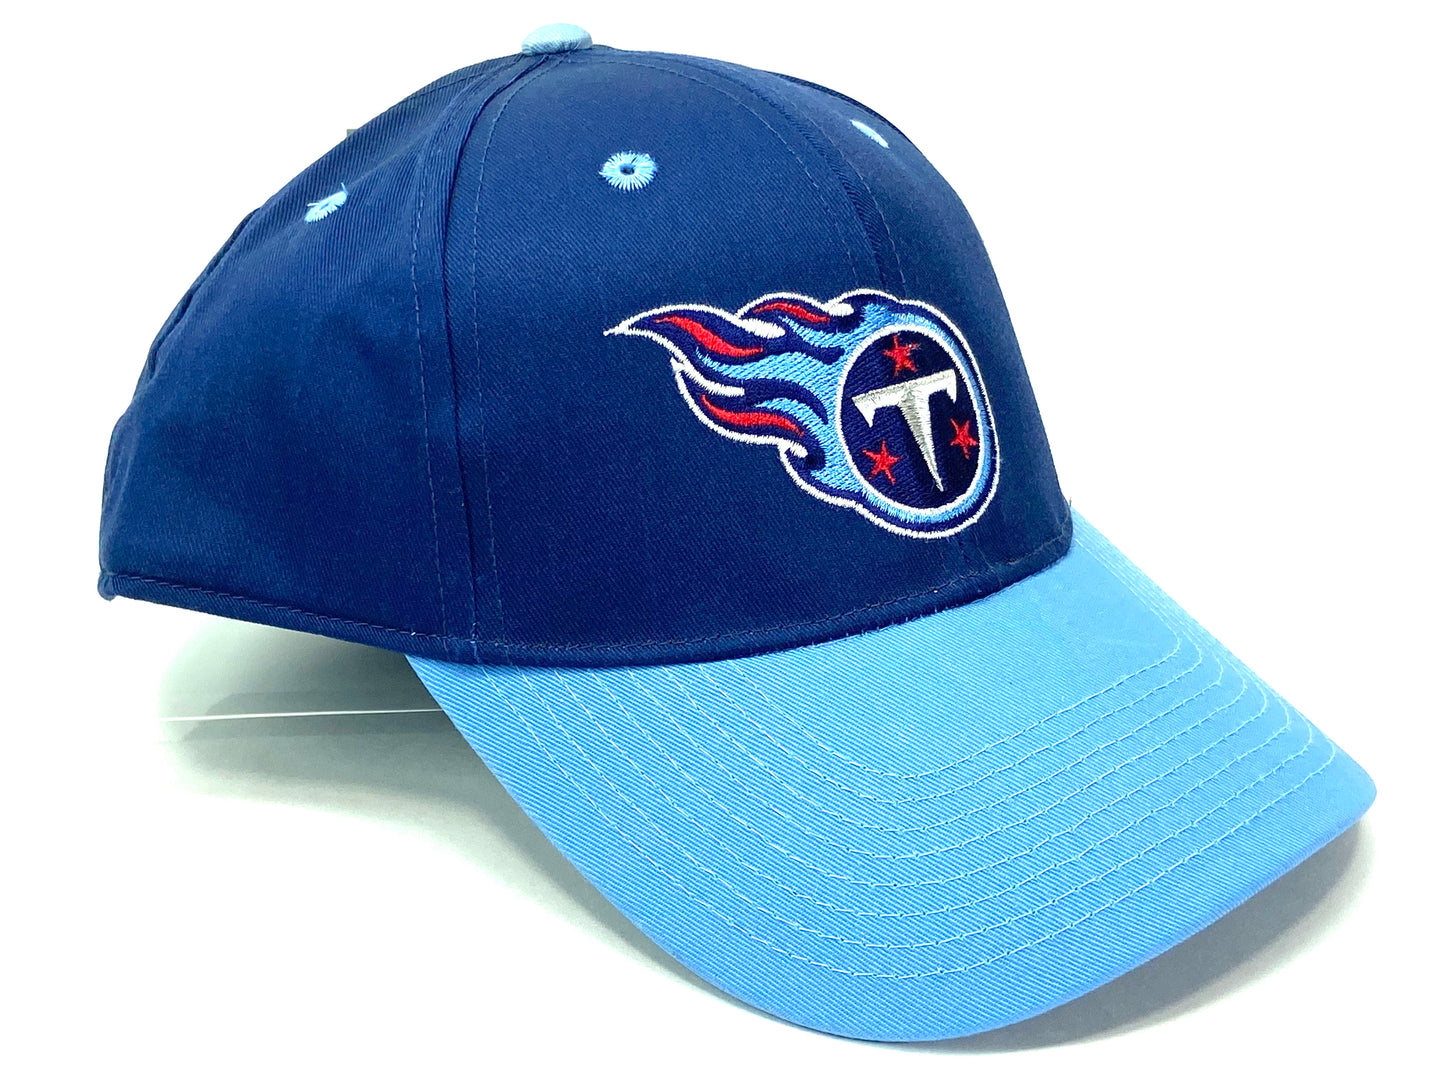 Tennessee Titans Vintage NFL Blue Cotton/Poly Snapback NOS By Drew Pearson